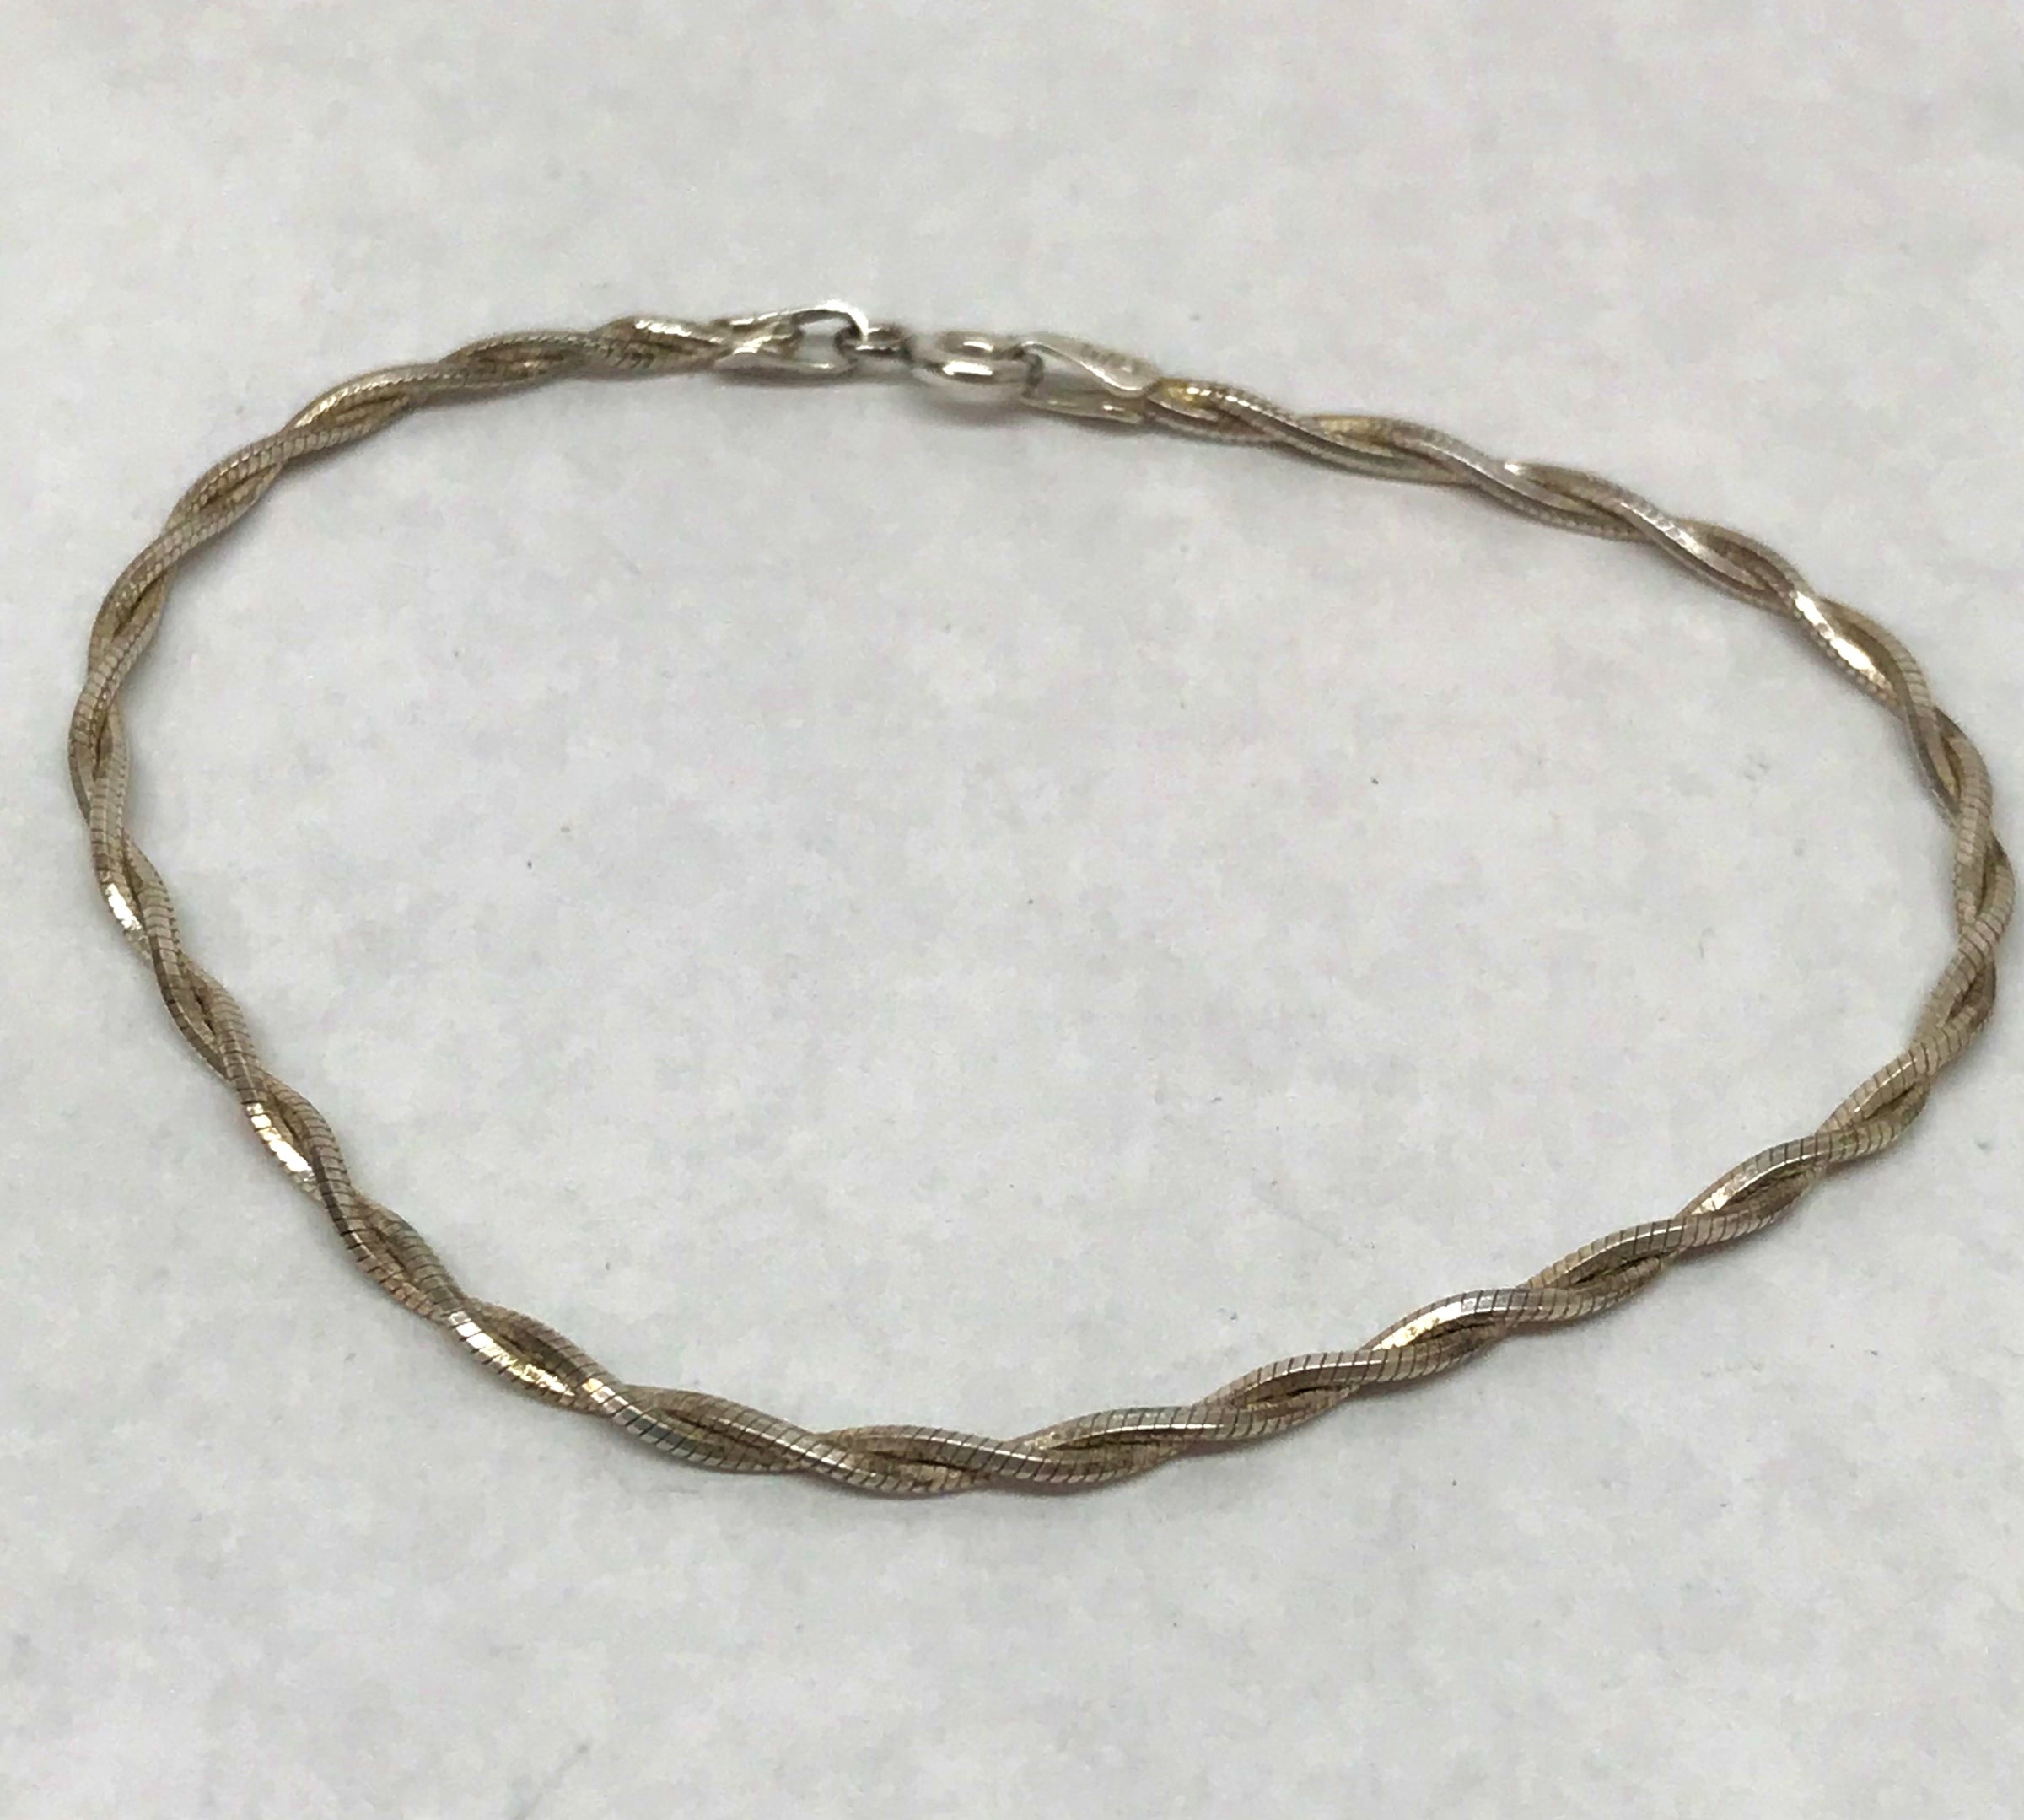 www.hersandhistreasures.com/products/925-sterling-silver-twisted-snake-chain-bracelet-italy